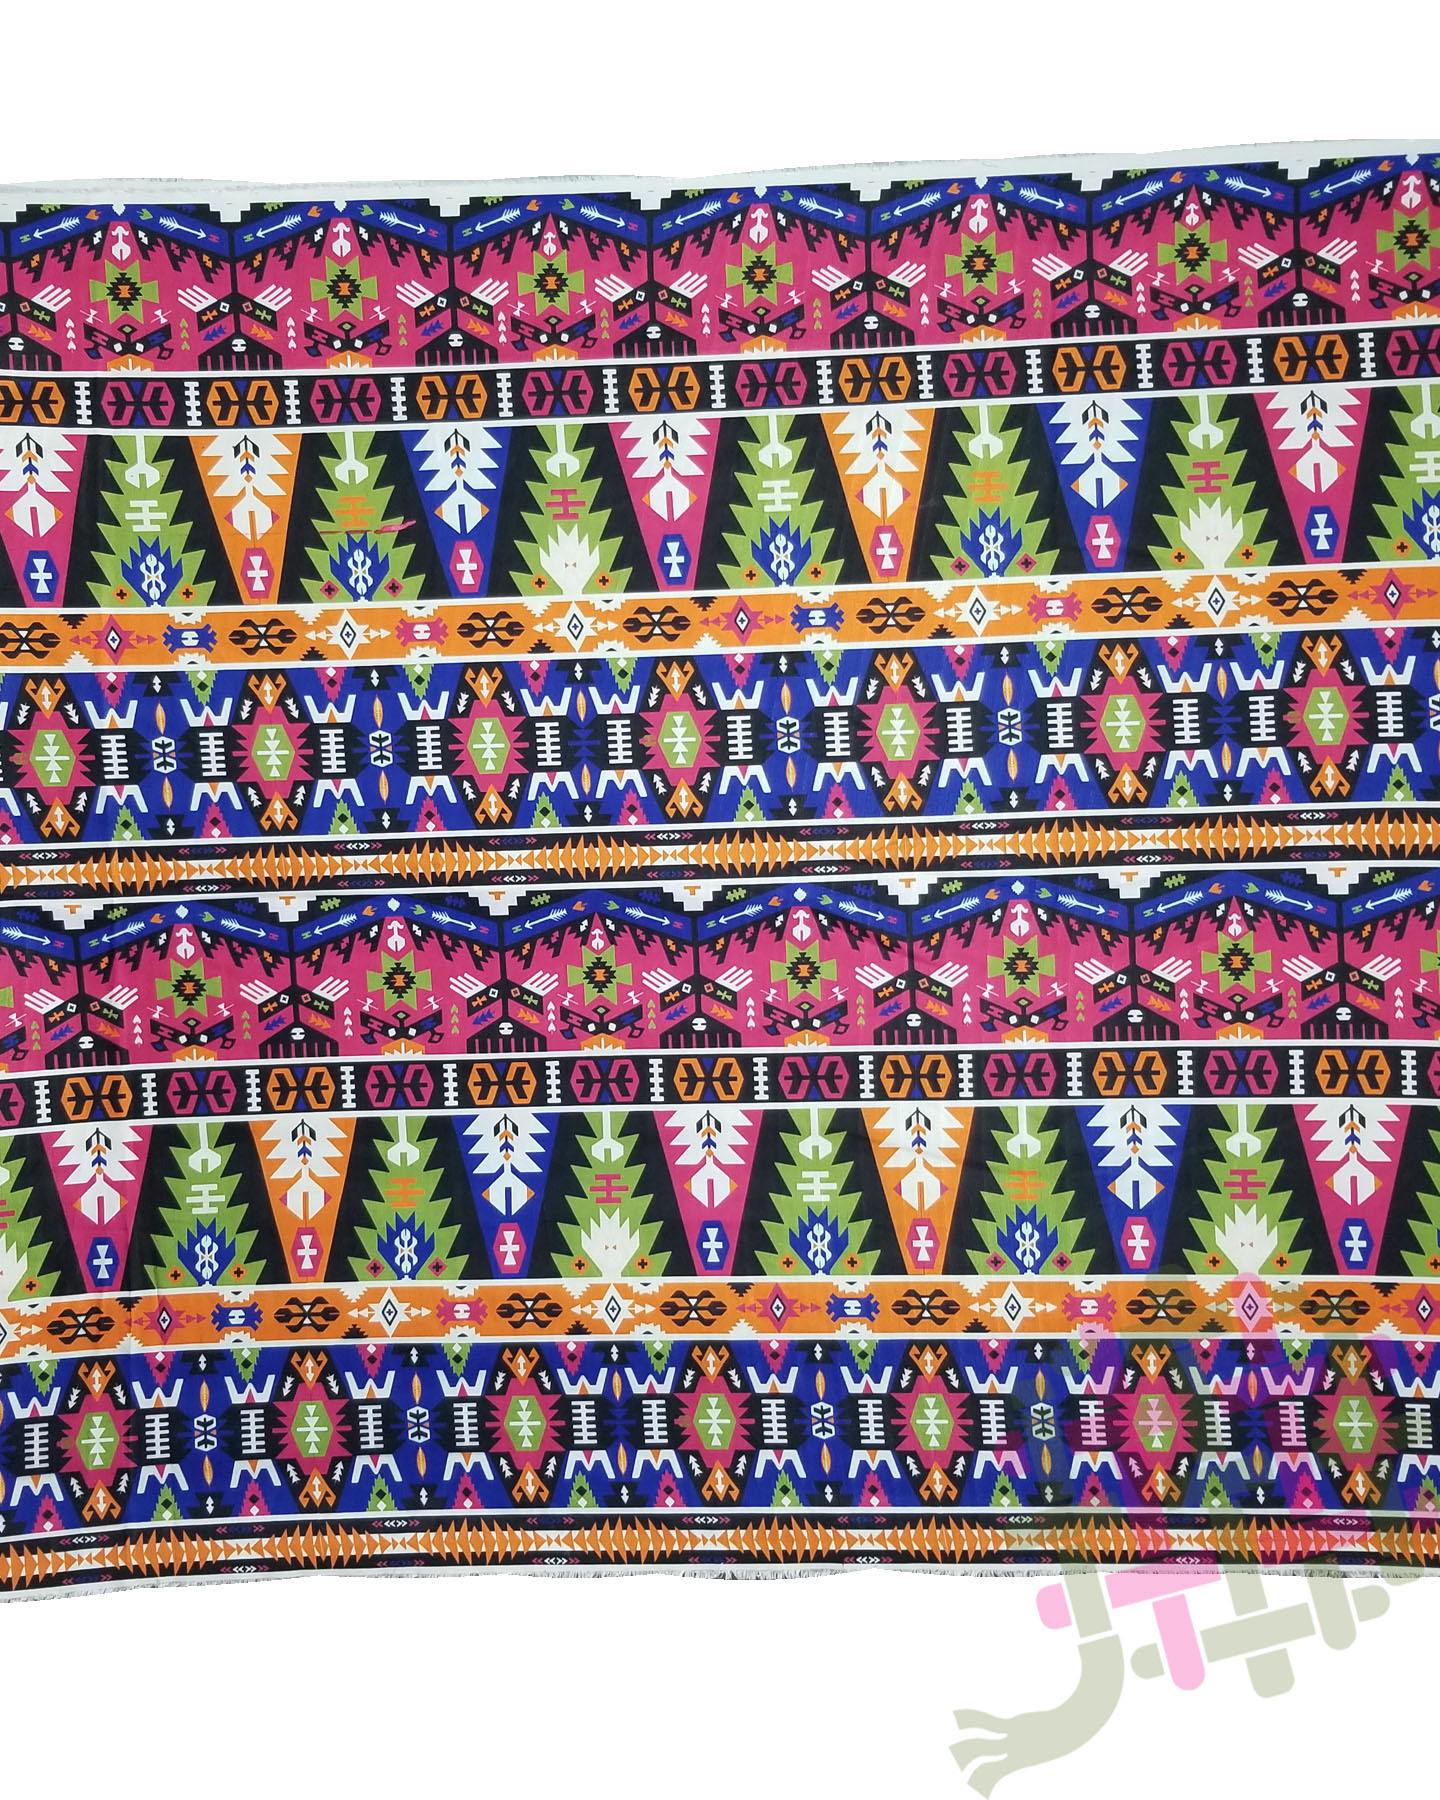 DeeArna Export's Fancy Mexico Digital Prints on Khadi Rayon Unstitch Fabric Material for Women's Clothing (58